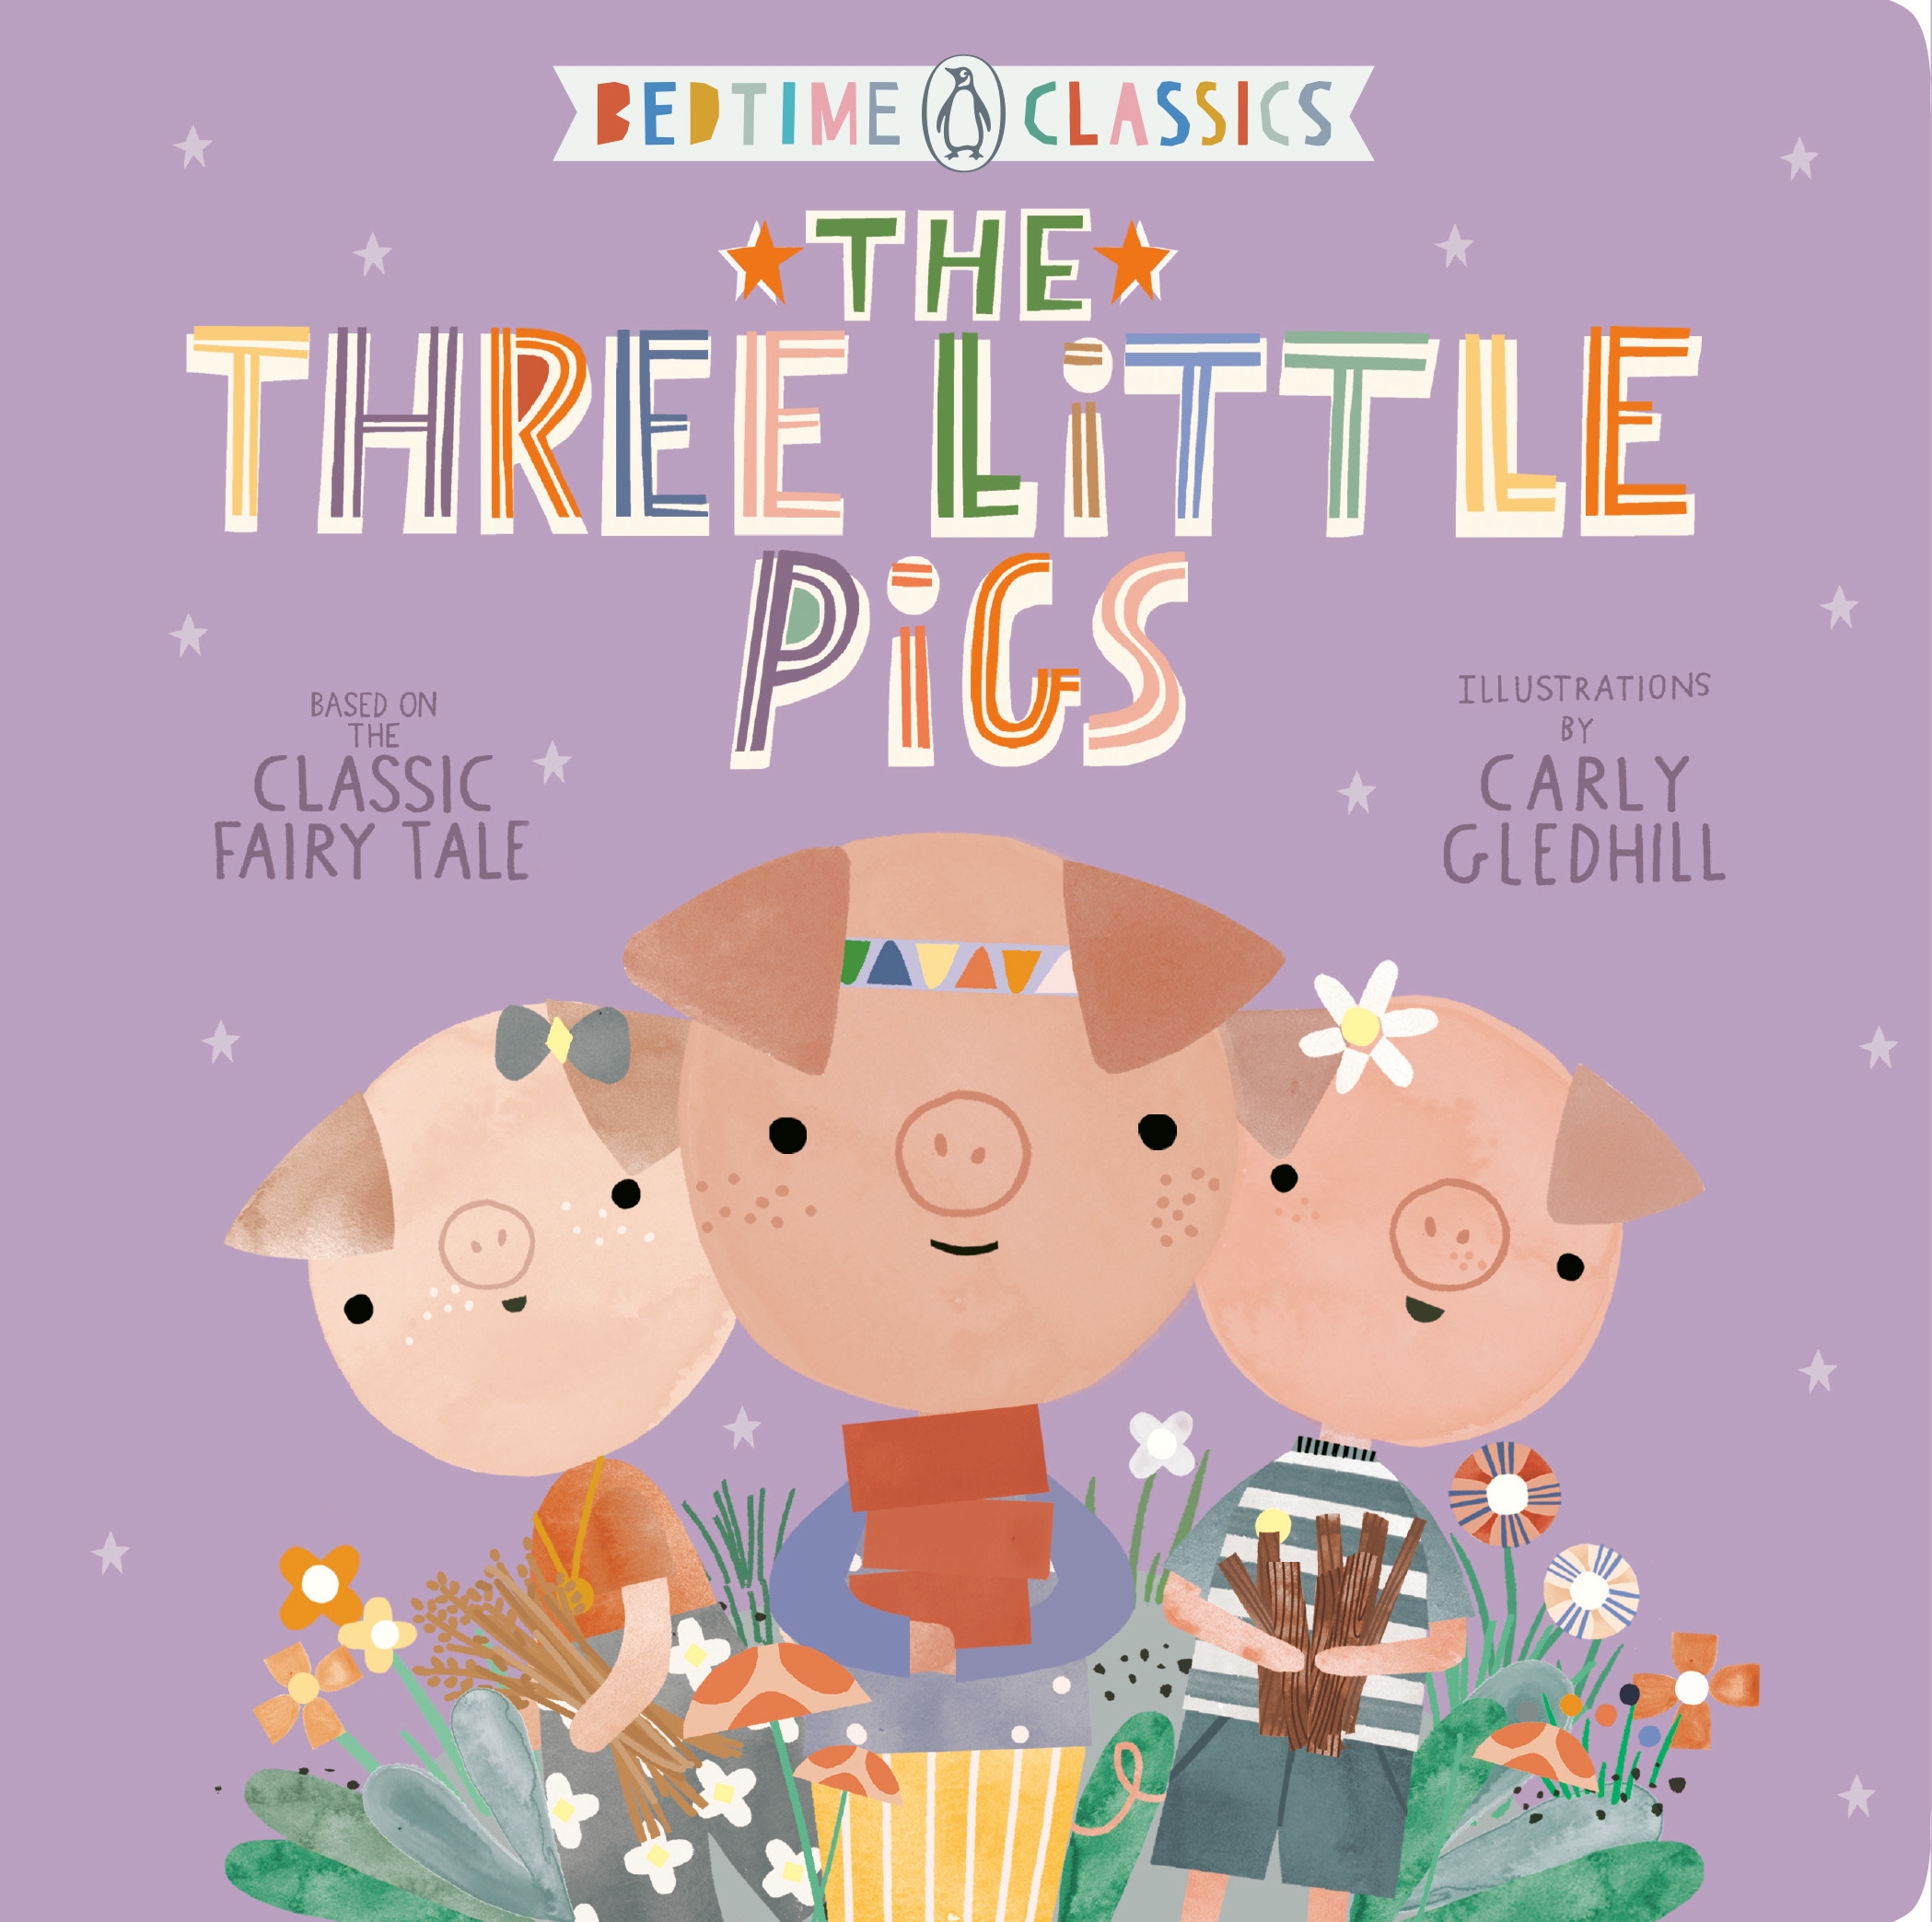 the-three-little-pigs-by-illustrated-by-carly-gledhill-penguin-books-australia